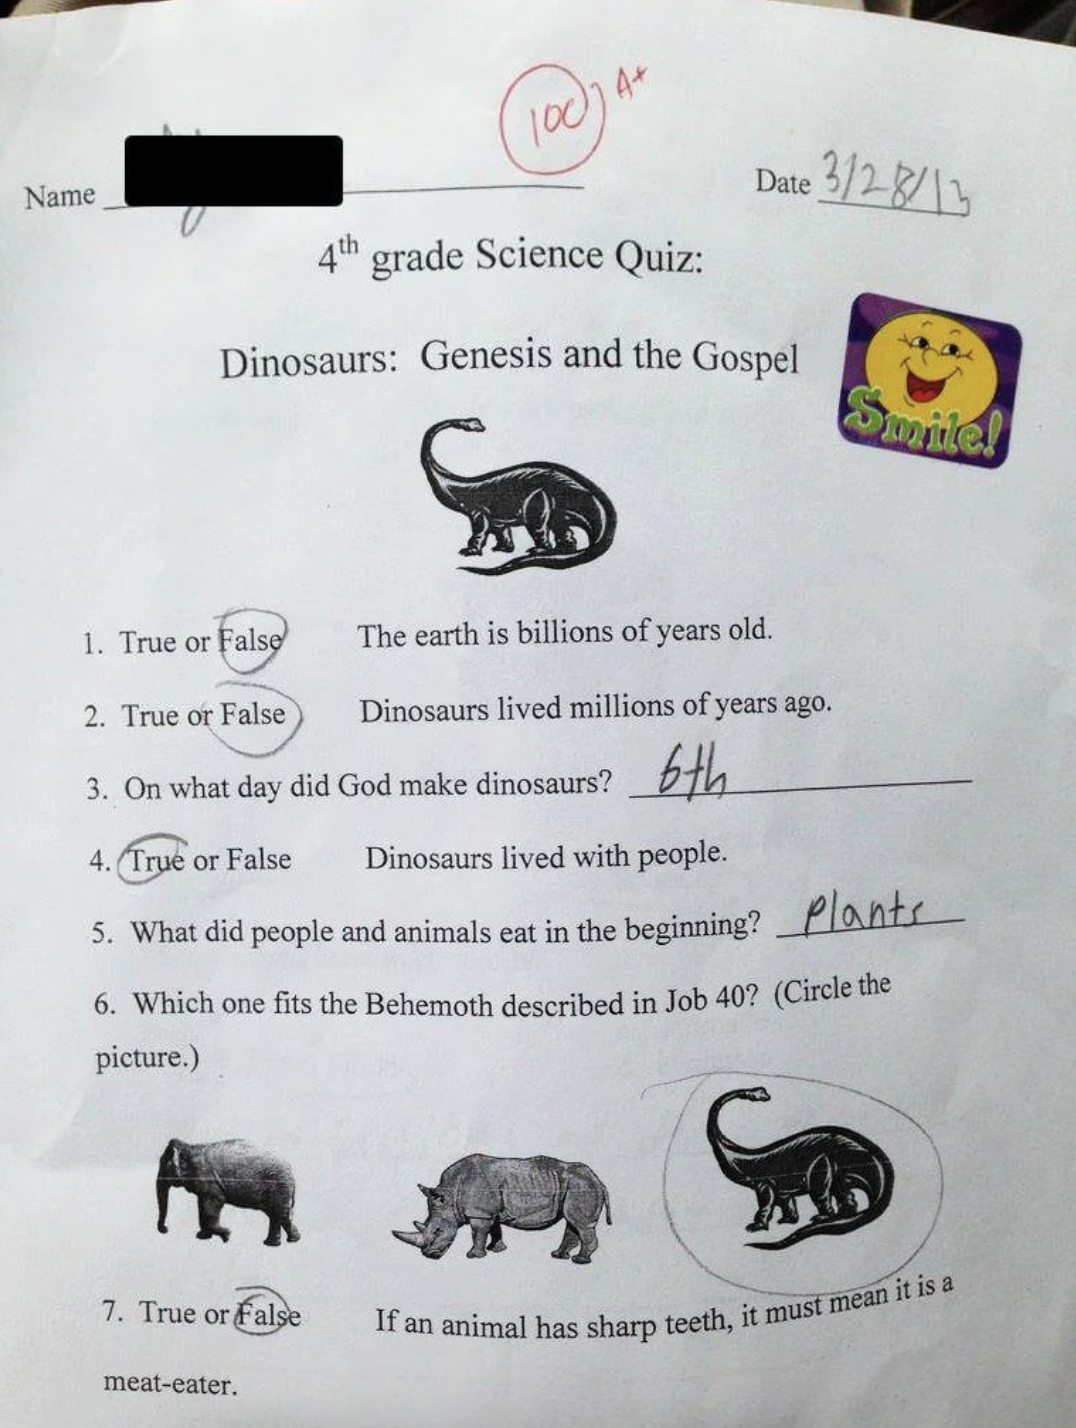 In a fourth-grade science test, labeling statements like &quot;The earth is billions of years old&quot; and &quot;Dinosaurs lived millions of years ago&quot; &quot;false,&quot; and answering &quot;sixth&quot; to &quot;On what day did God make dinosaurs,&quot; earned the student a 100%